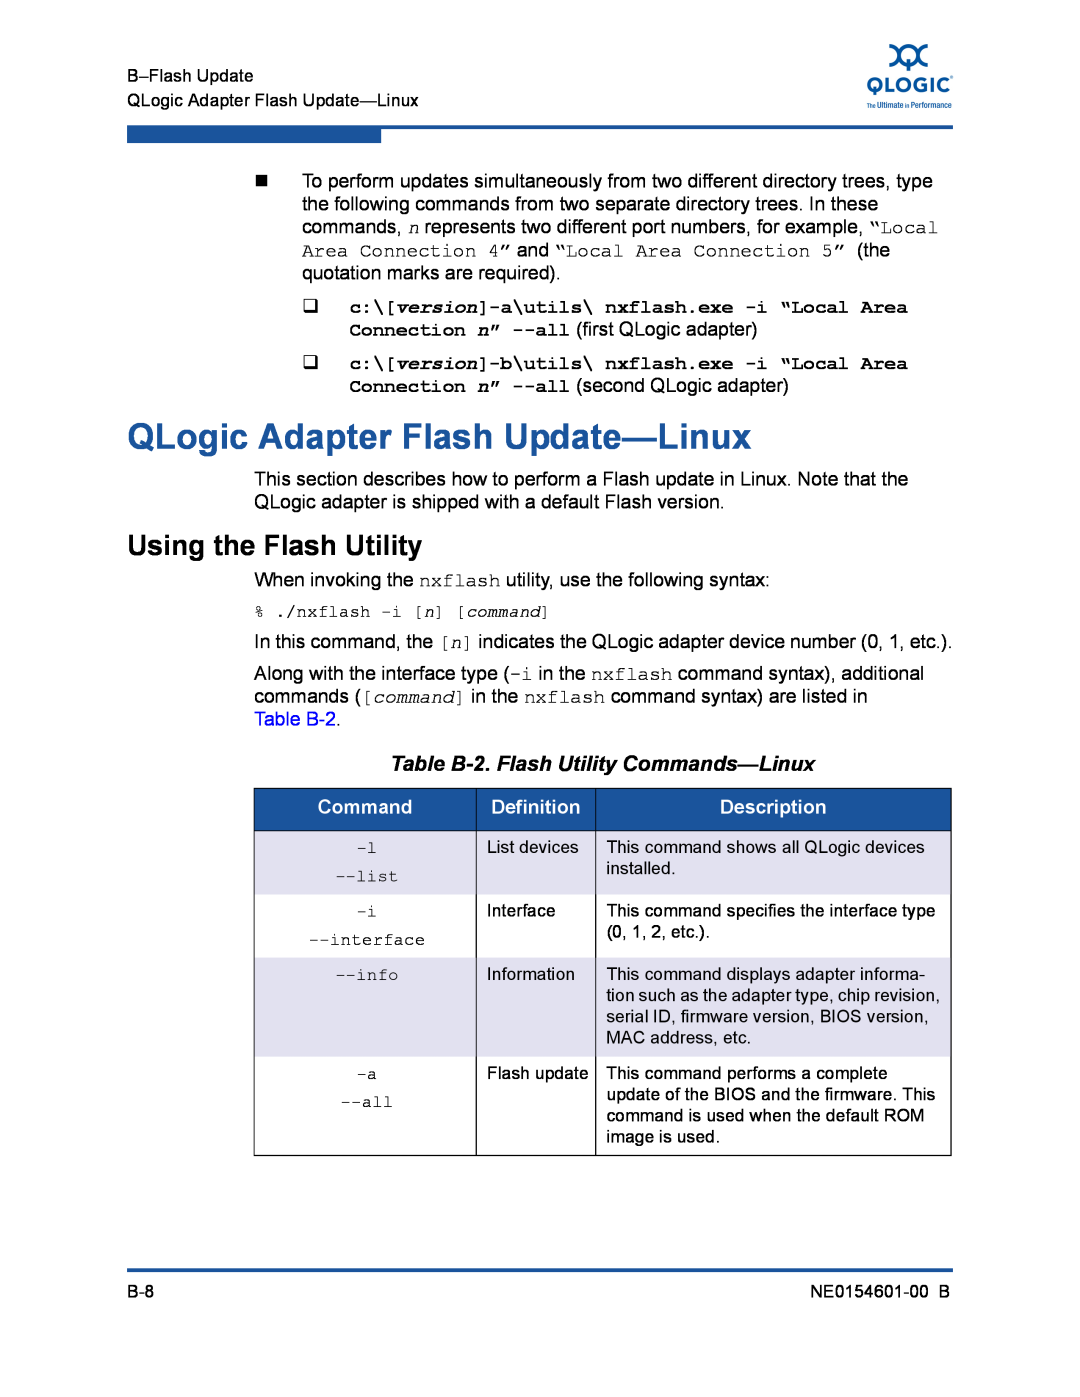 Q-Logic 3100, 3000 QLogic Adapter Flash Update-Linux, Table B-2. Flash Utility Commands-Linux, Using the Flash Utility 